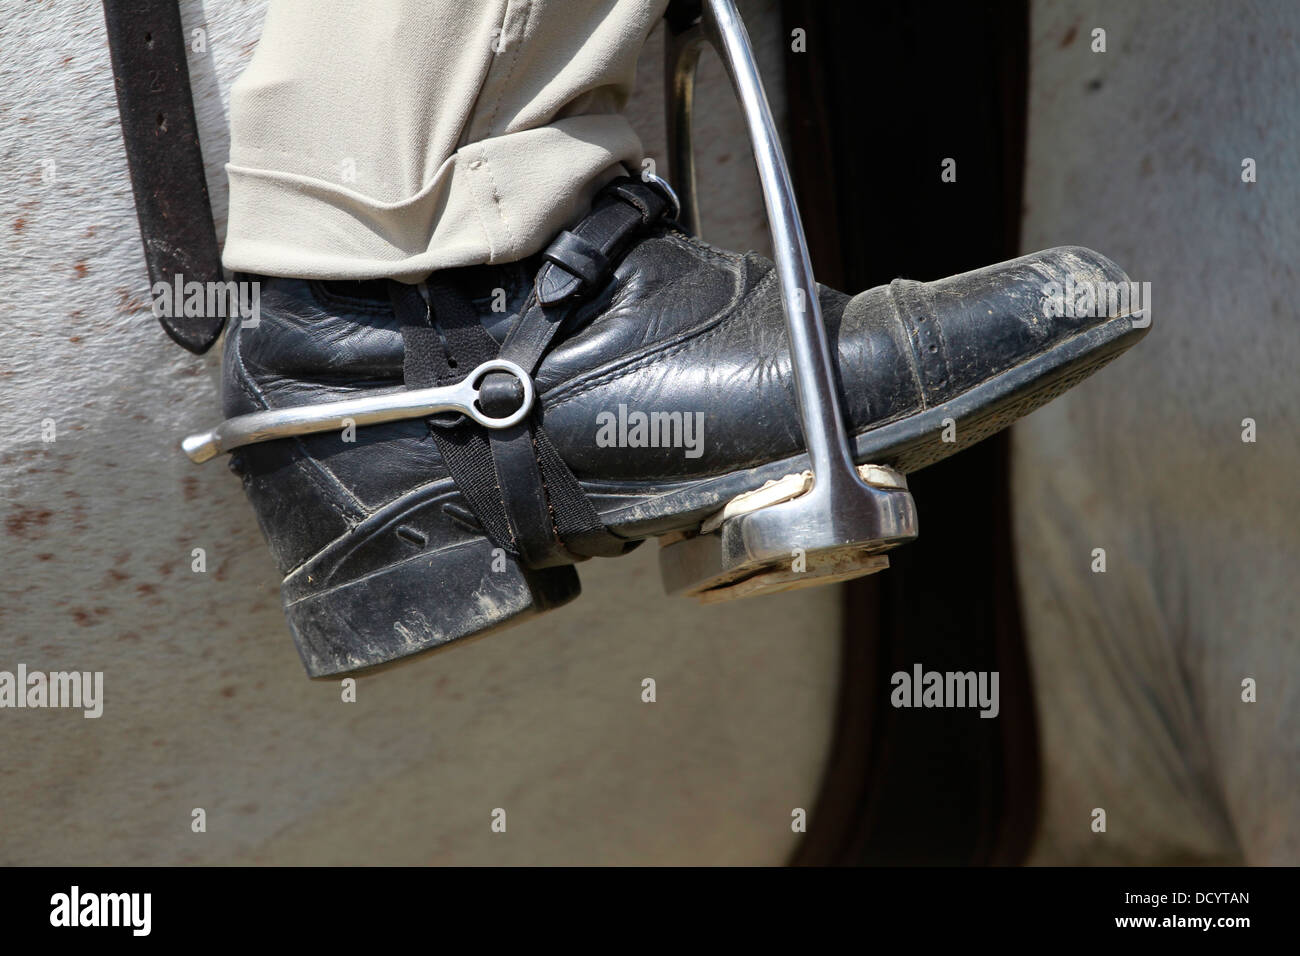 Equitector Riding Boots - Spurs, spur slip and spur rests